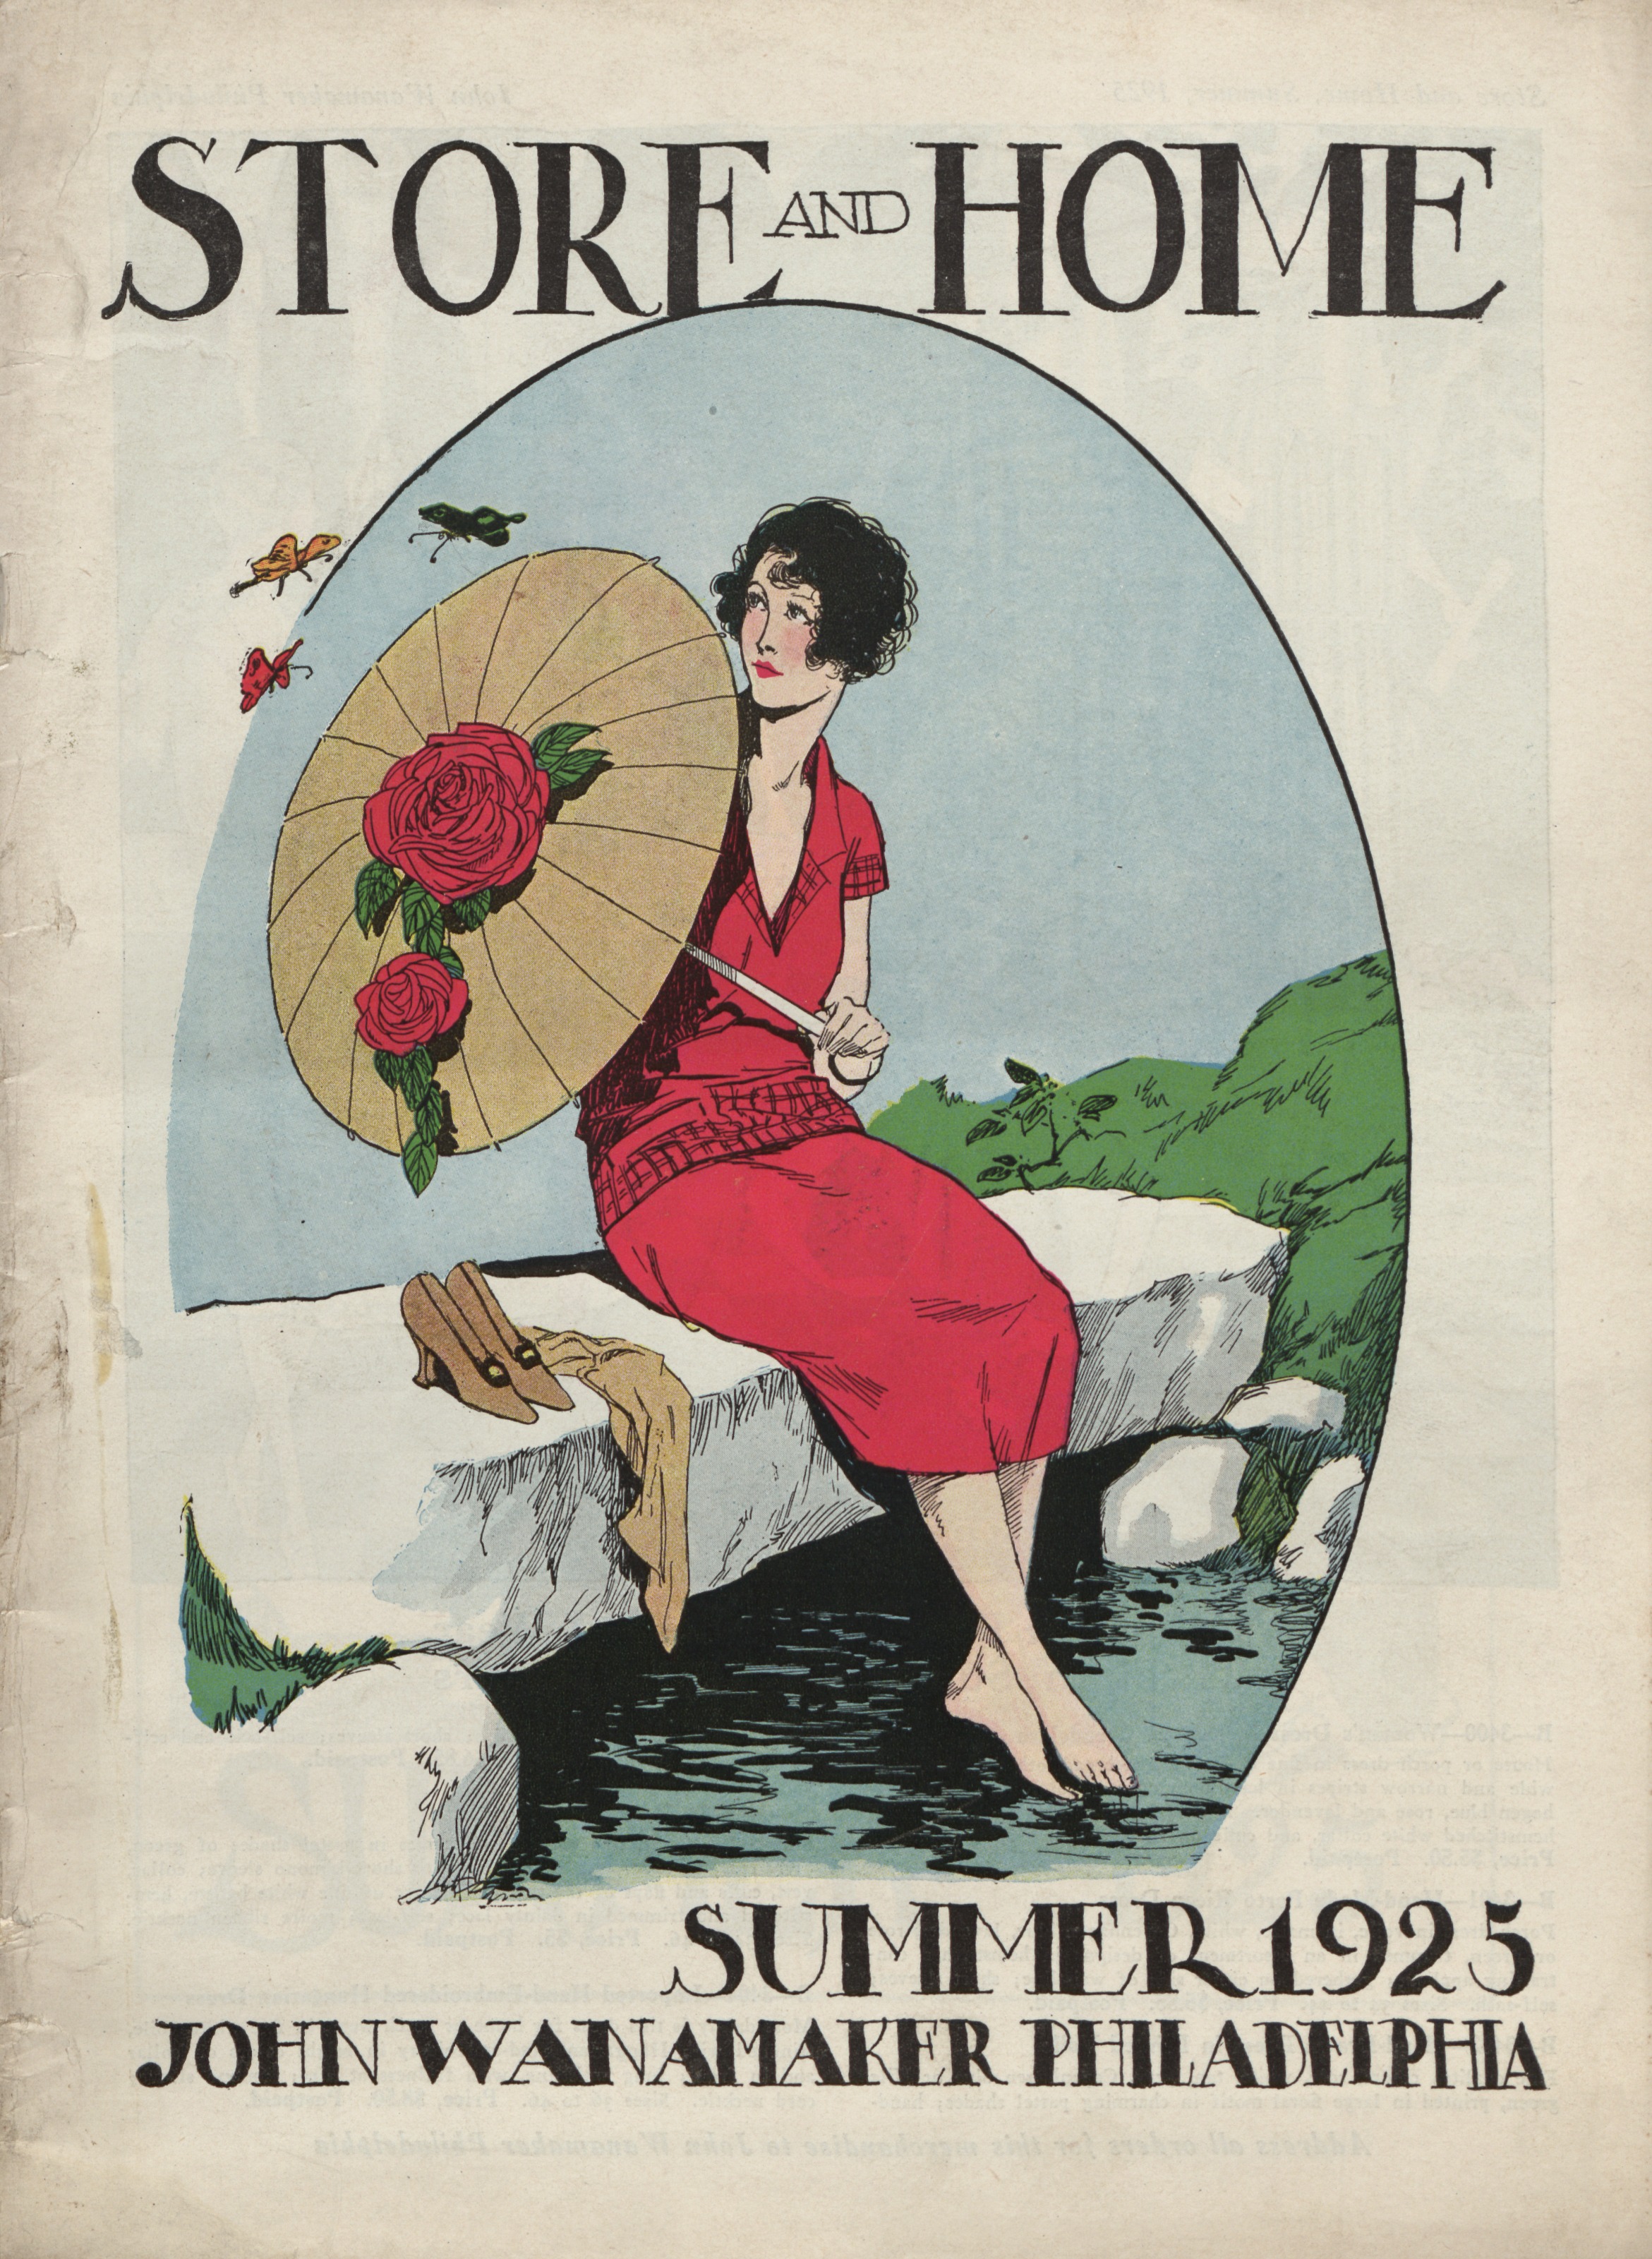 Wanamaker catalog cover for summer 1925 showing illustration of a woman with a parasol and red dress sitting barefoot on a small stone bridge